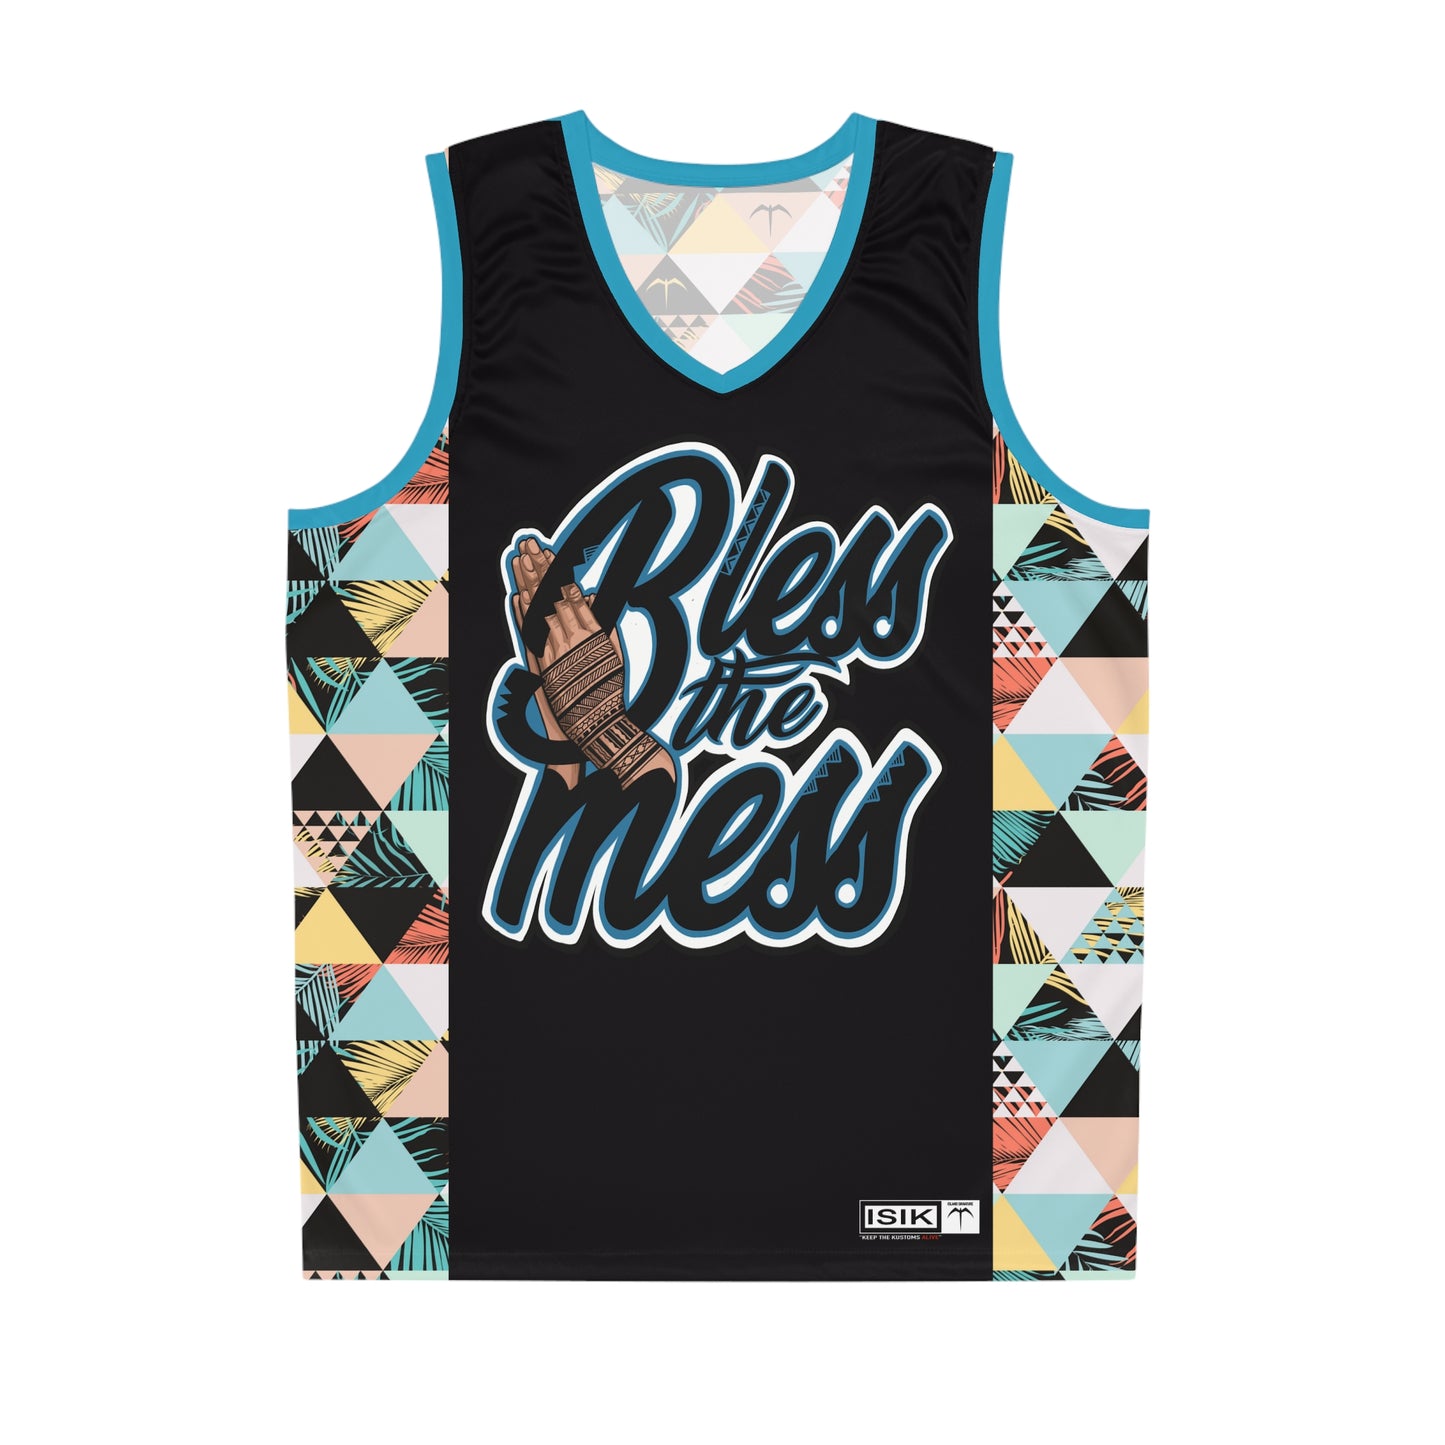 Bless the Mess Tank Tops